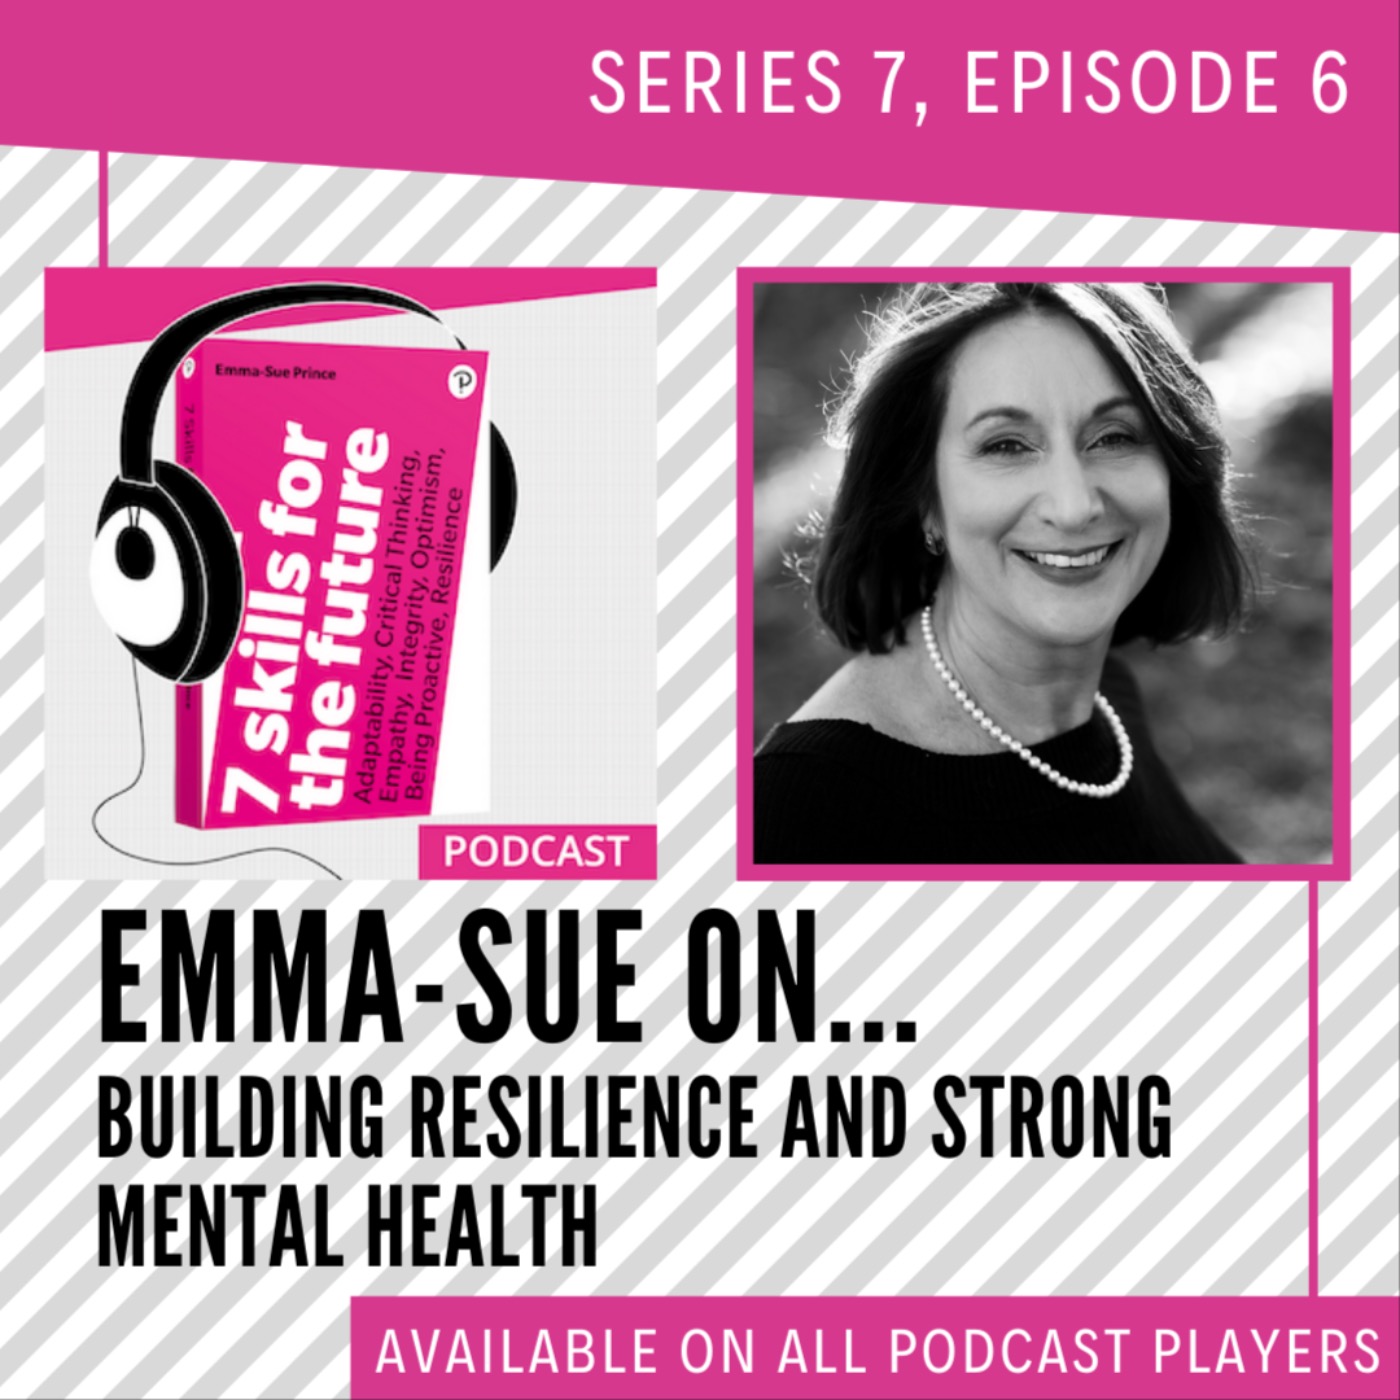 Building resilience and strong mental health